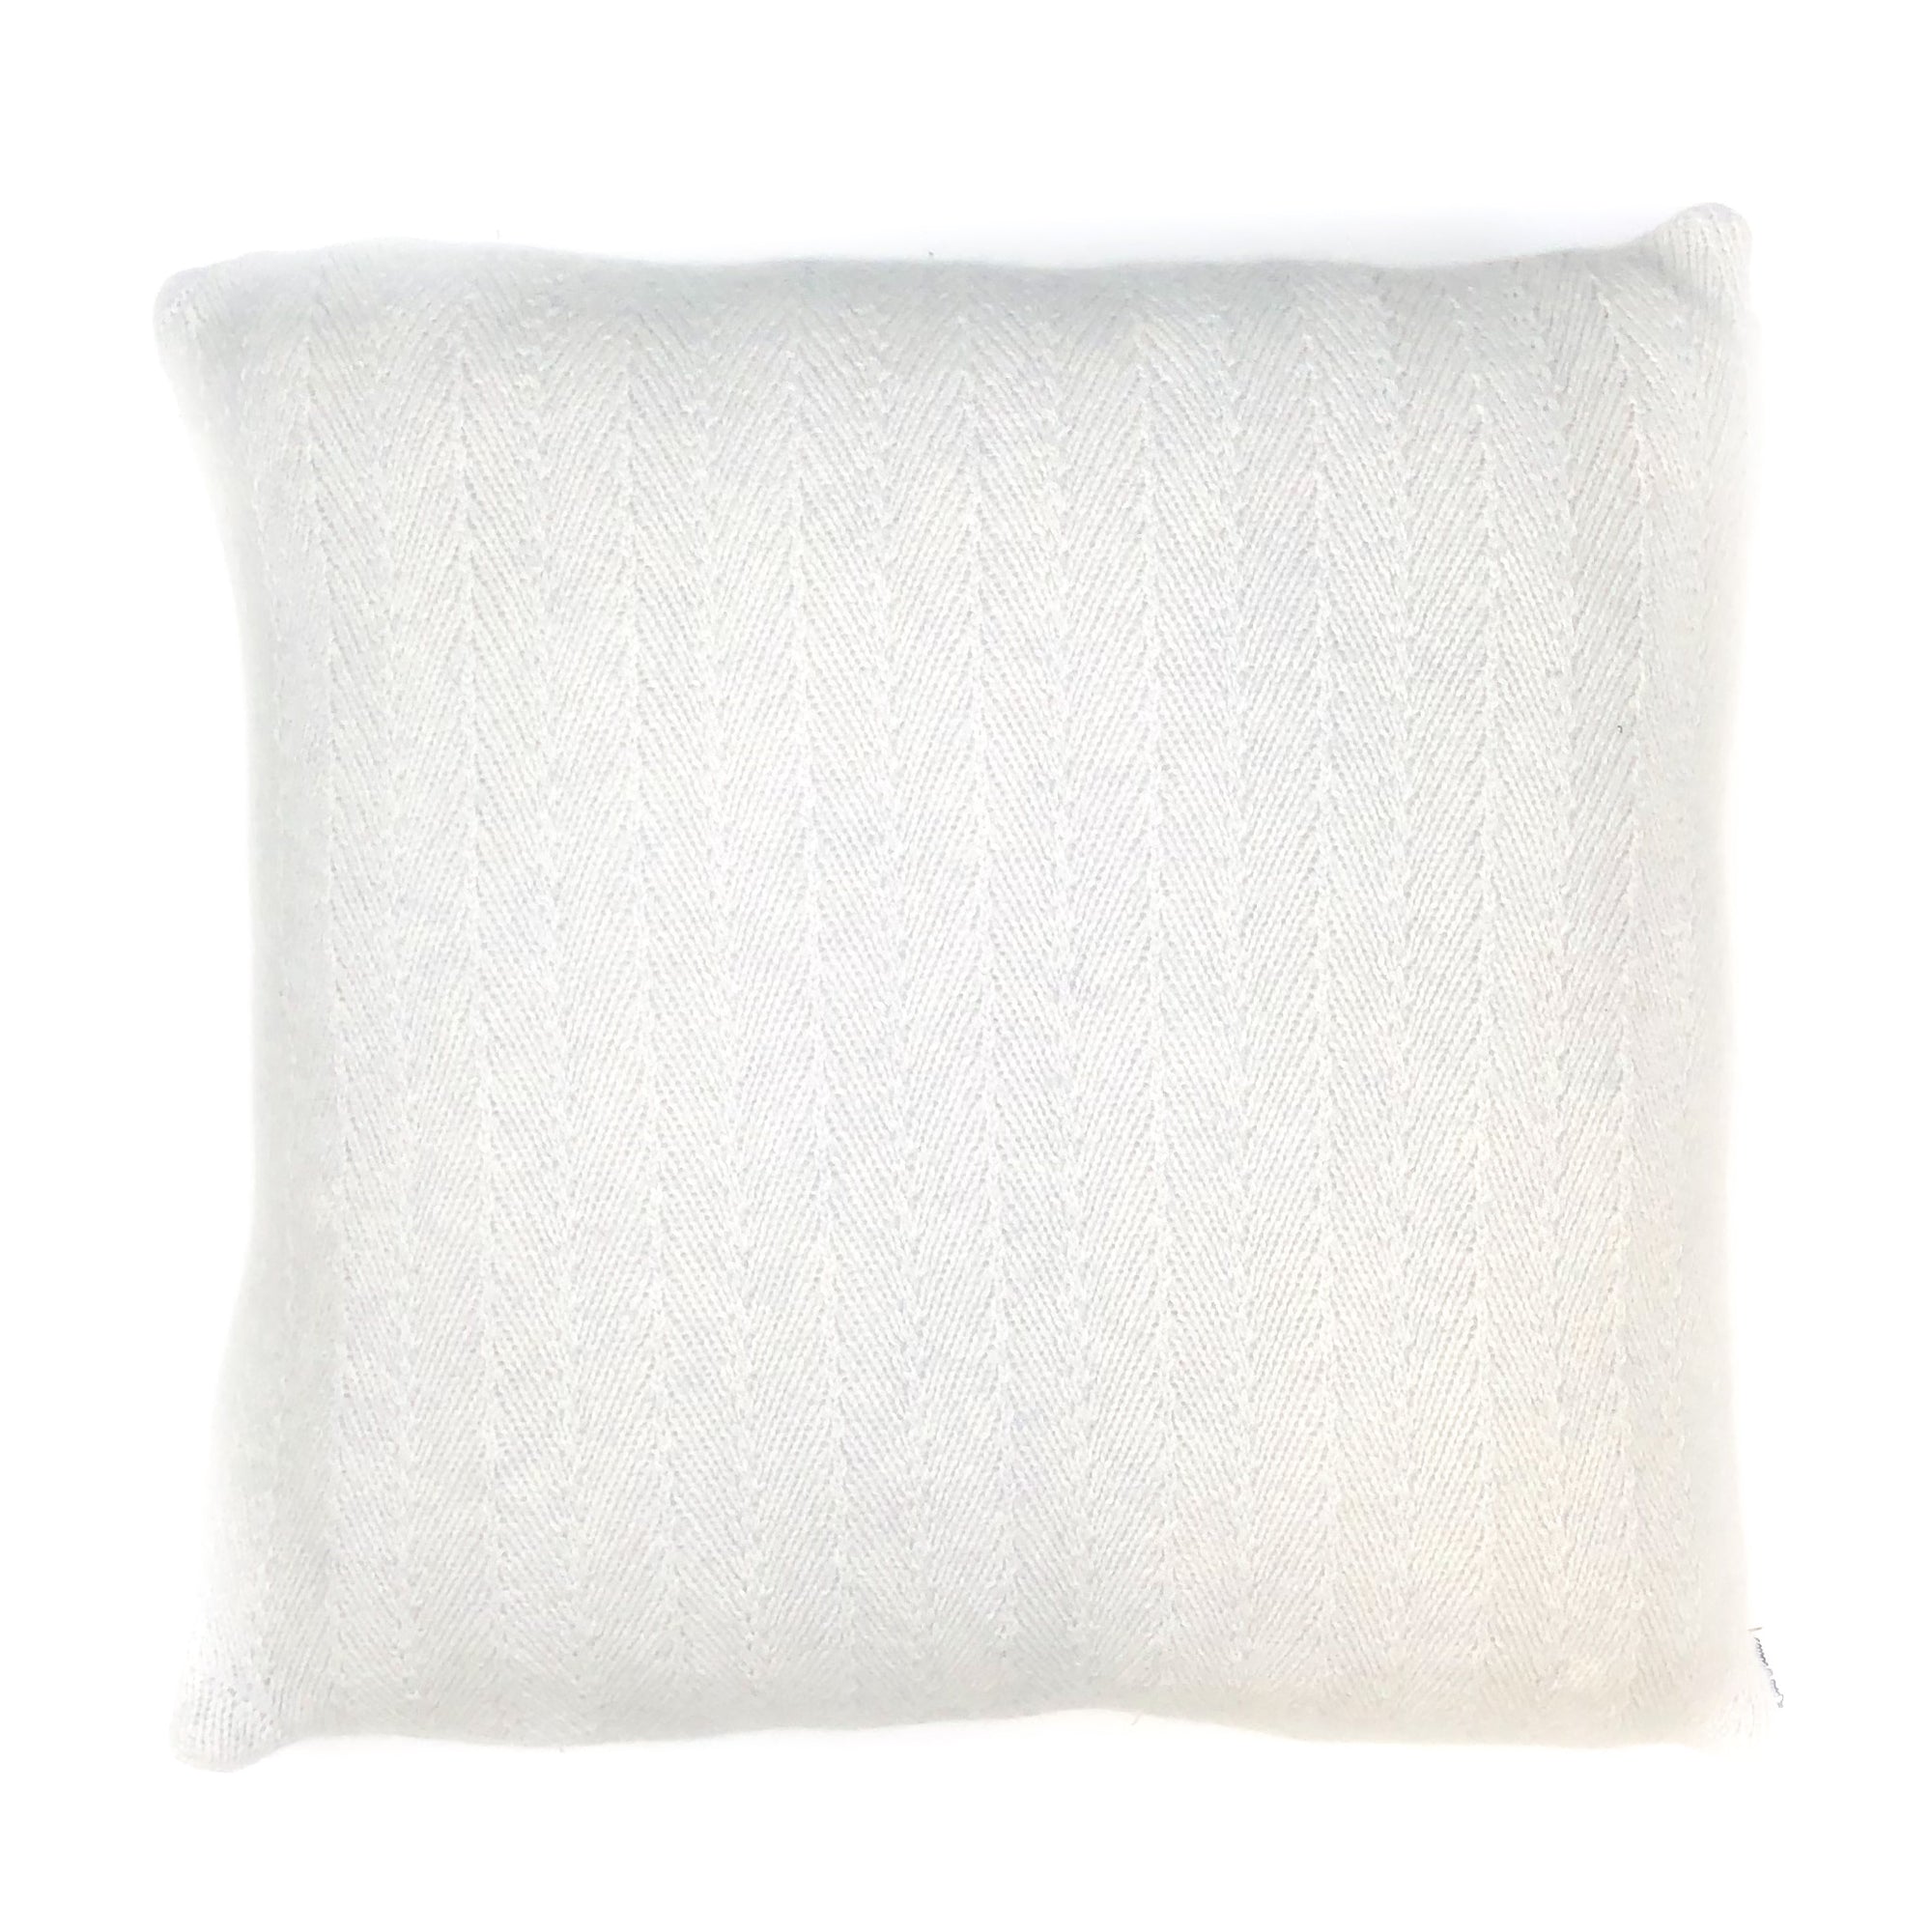 16 x 16 Light Heathered Grey Pillow Cover